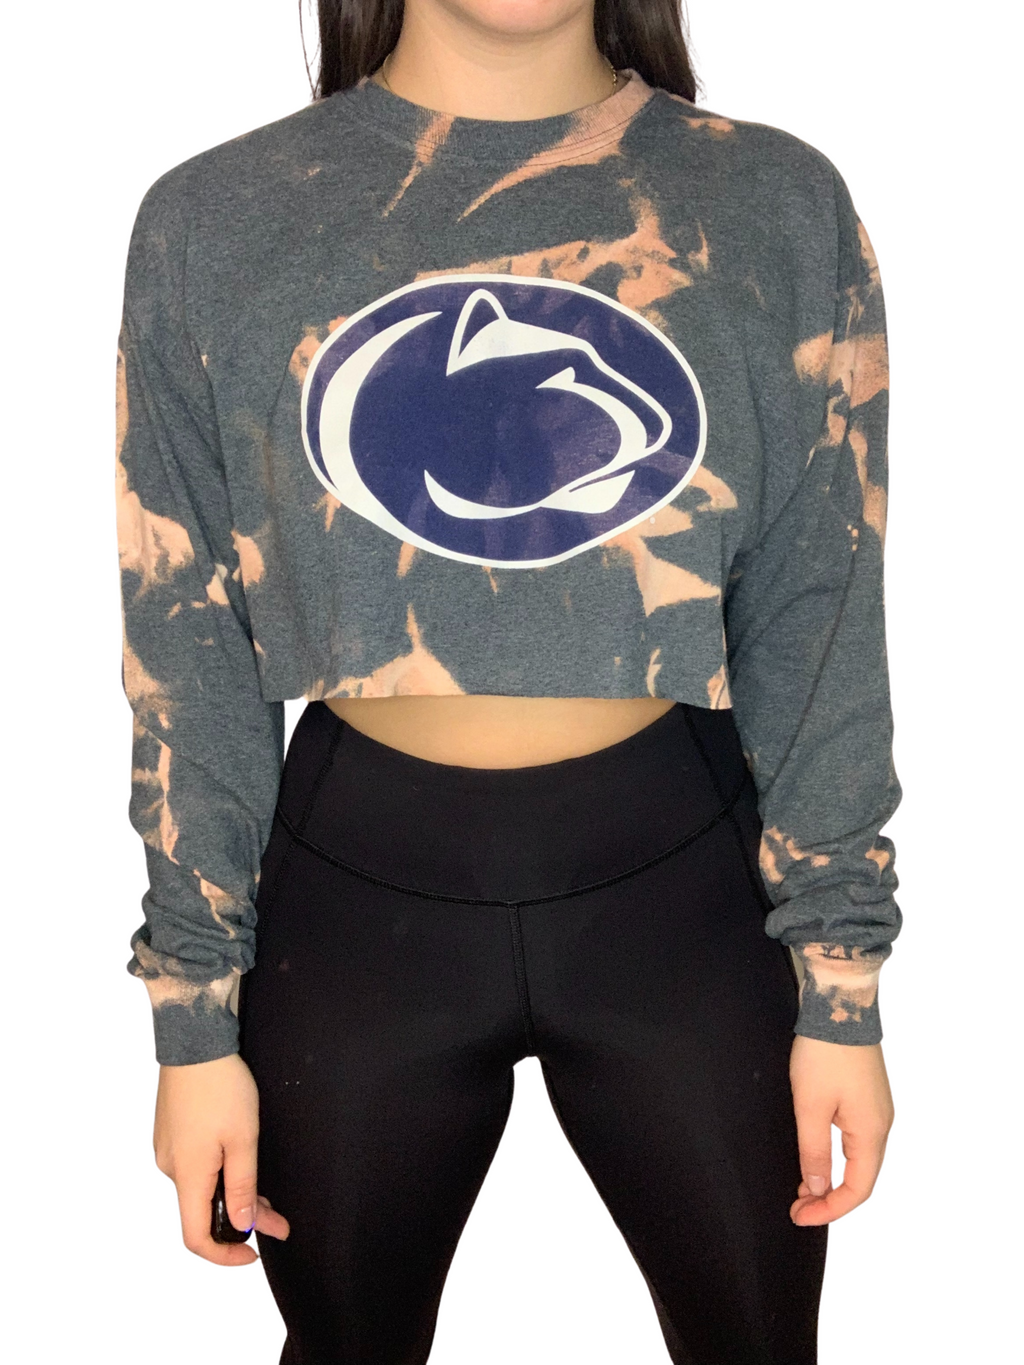 Penn State University Cropped & Bleached Long Sleeve Shirt